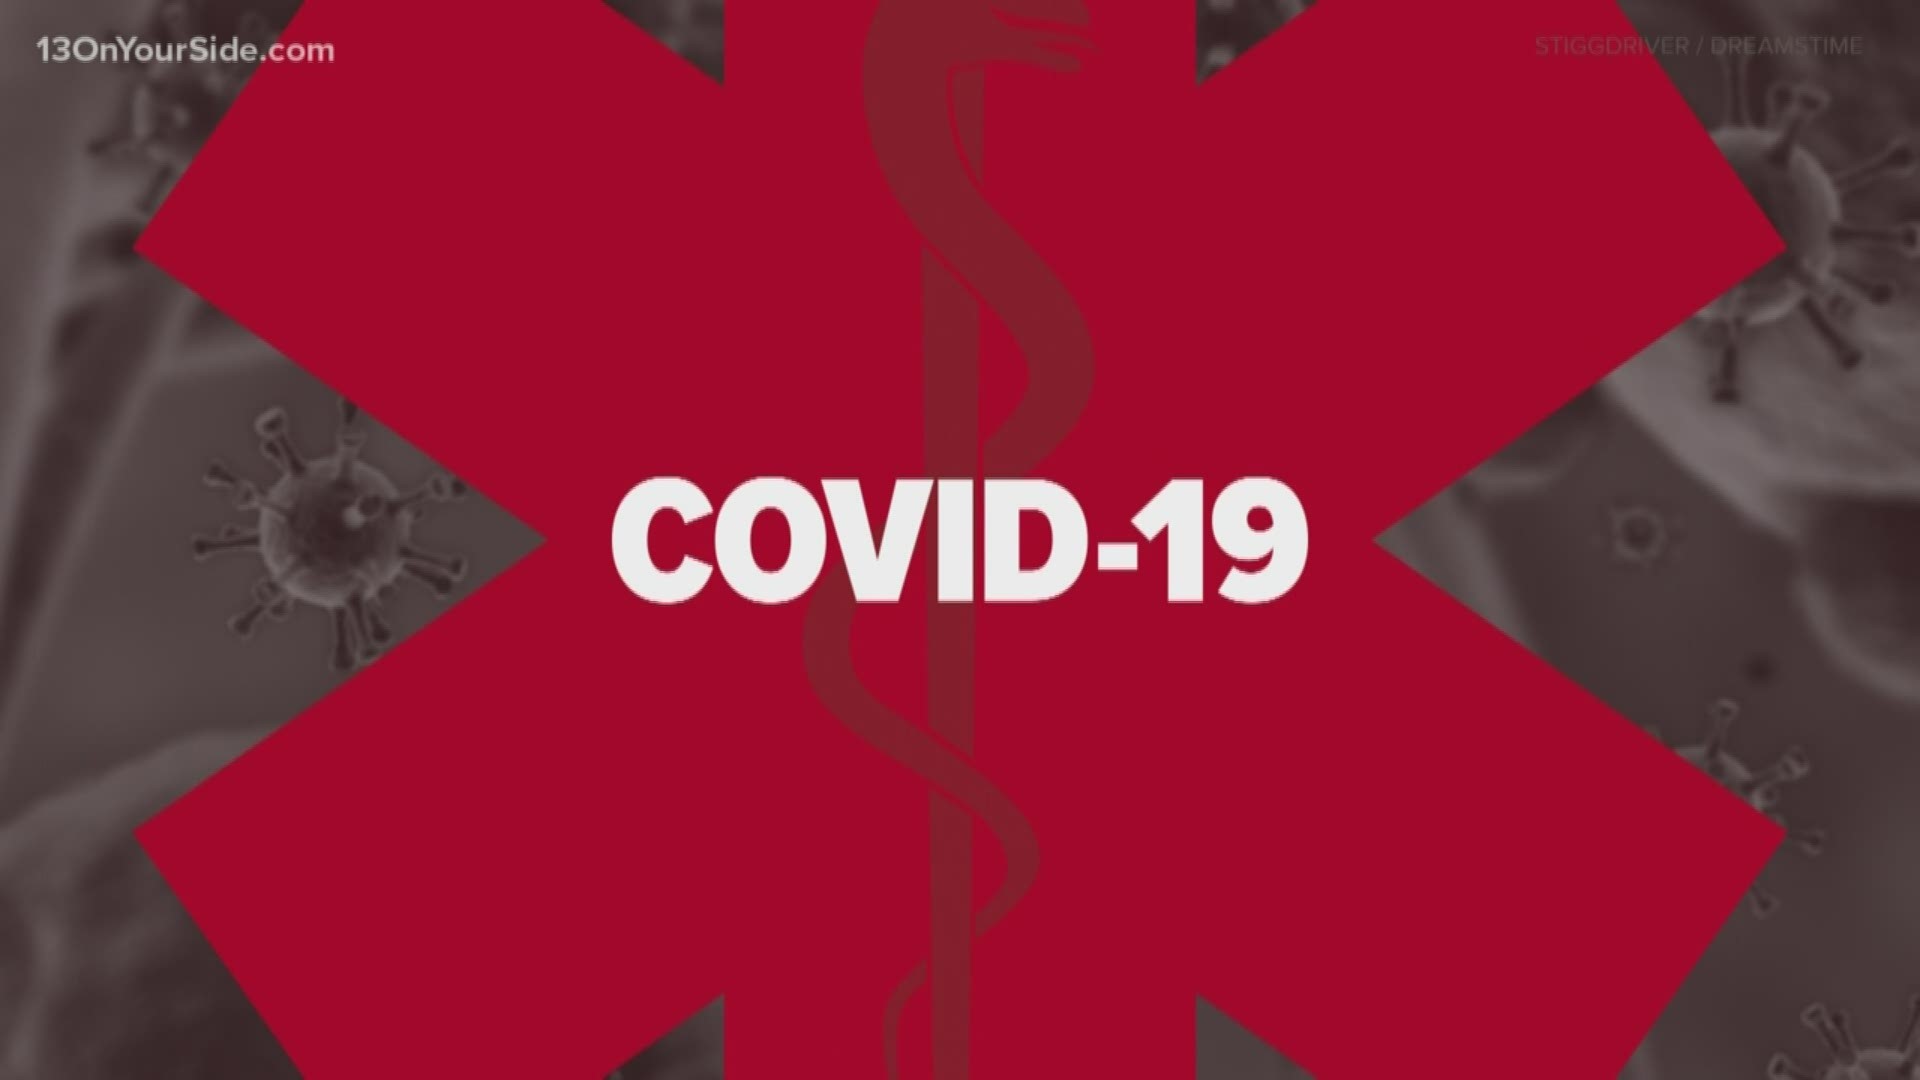 The scammers are selling fake products on websites related to the virus that causes COVID-19 and are using social media posts to "steal" money.